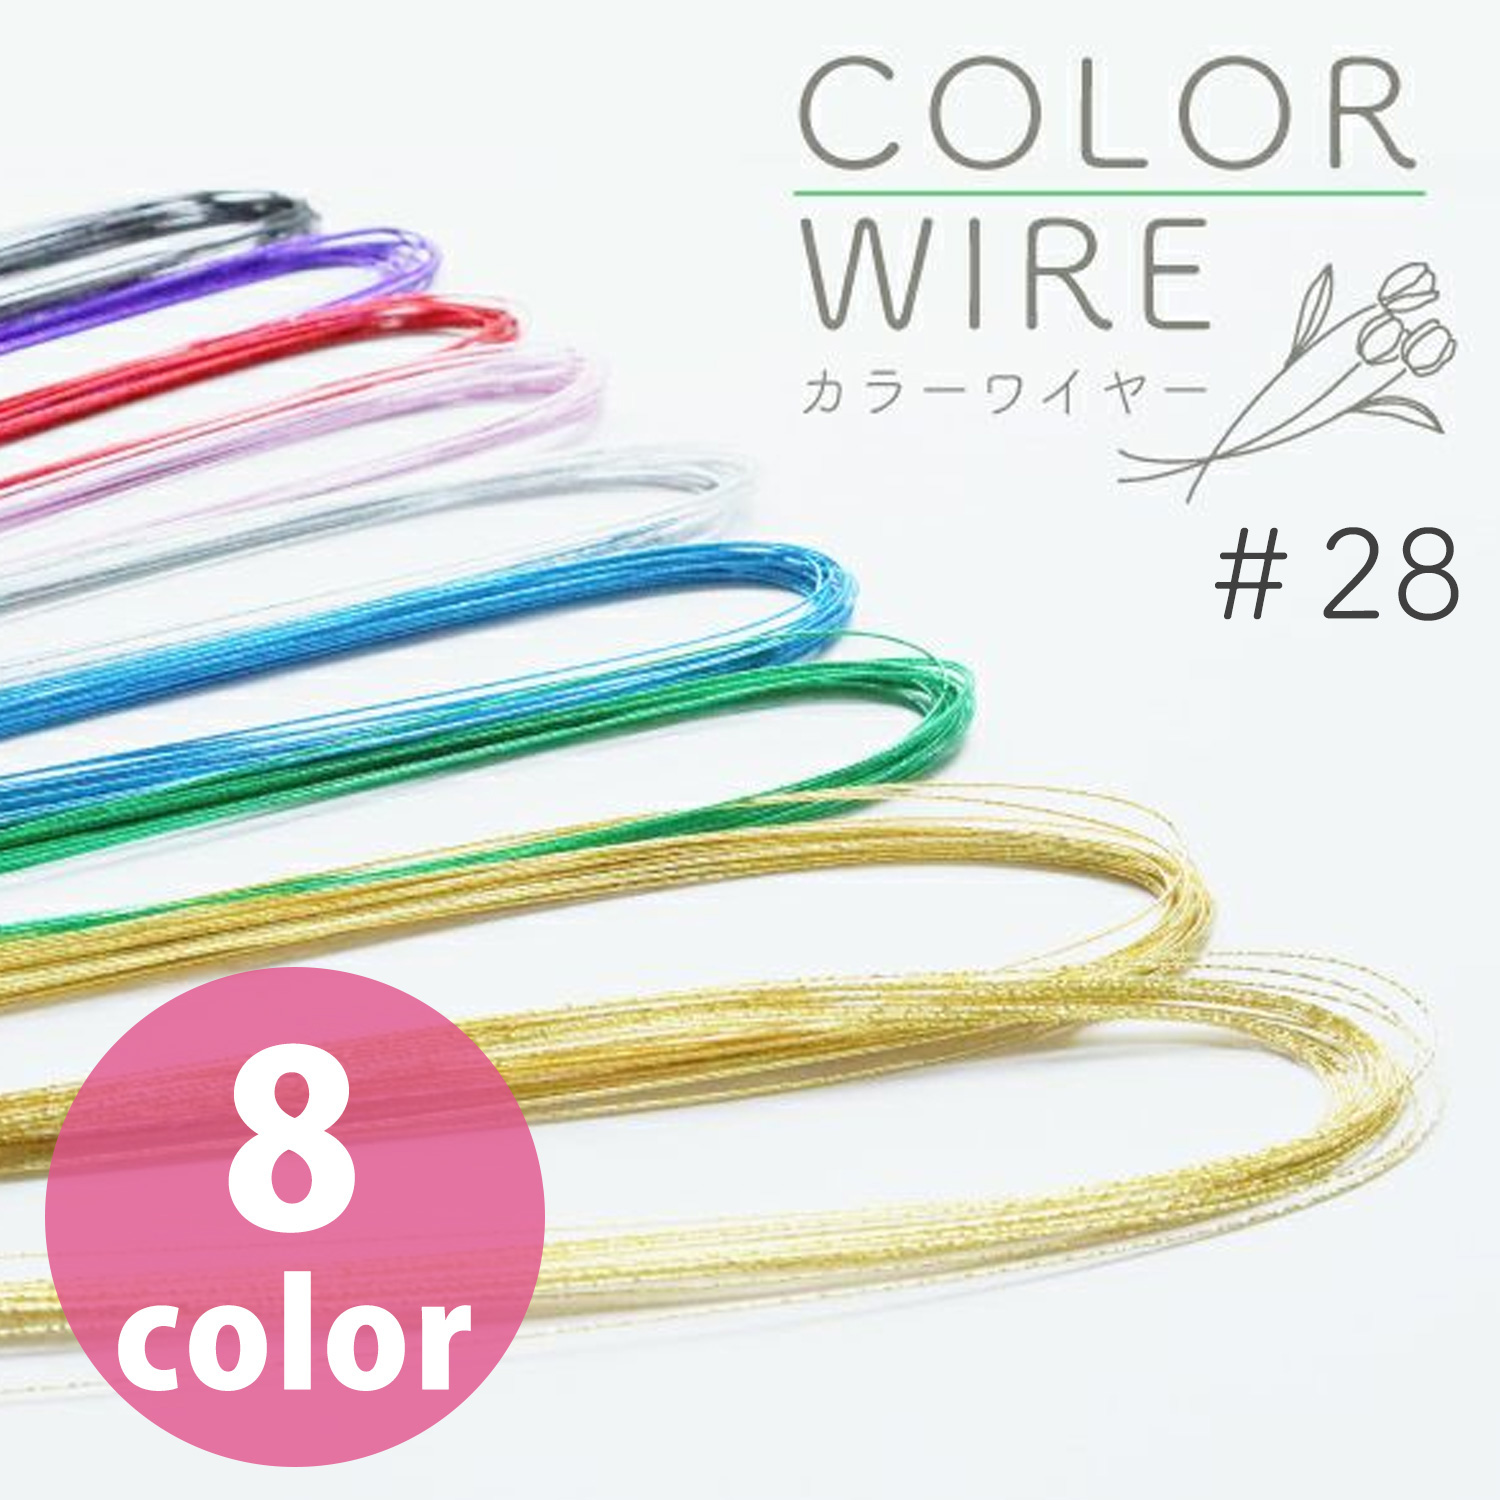 MAF-28 Color wire #28 72cm approximately 20 pieces (bag)